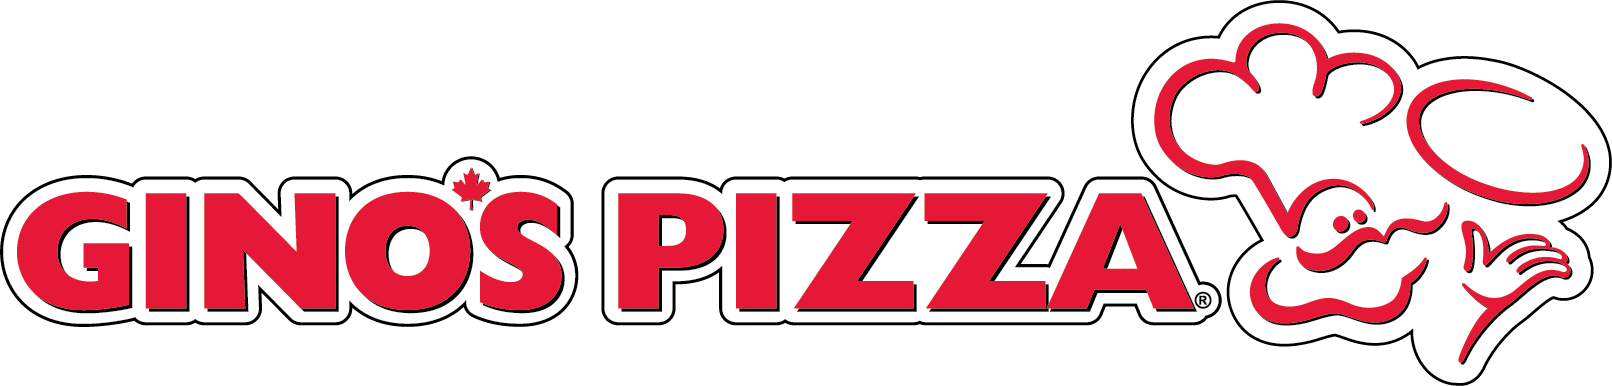 Enter To Win Free Pizza For A Year And A $500 Pre-paid - Enter To Win Free Pizza For A Year And A $500 Pre-paid (1612x386)